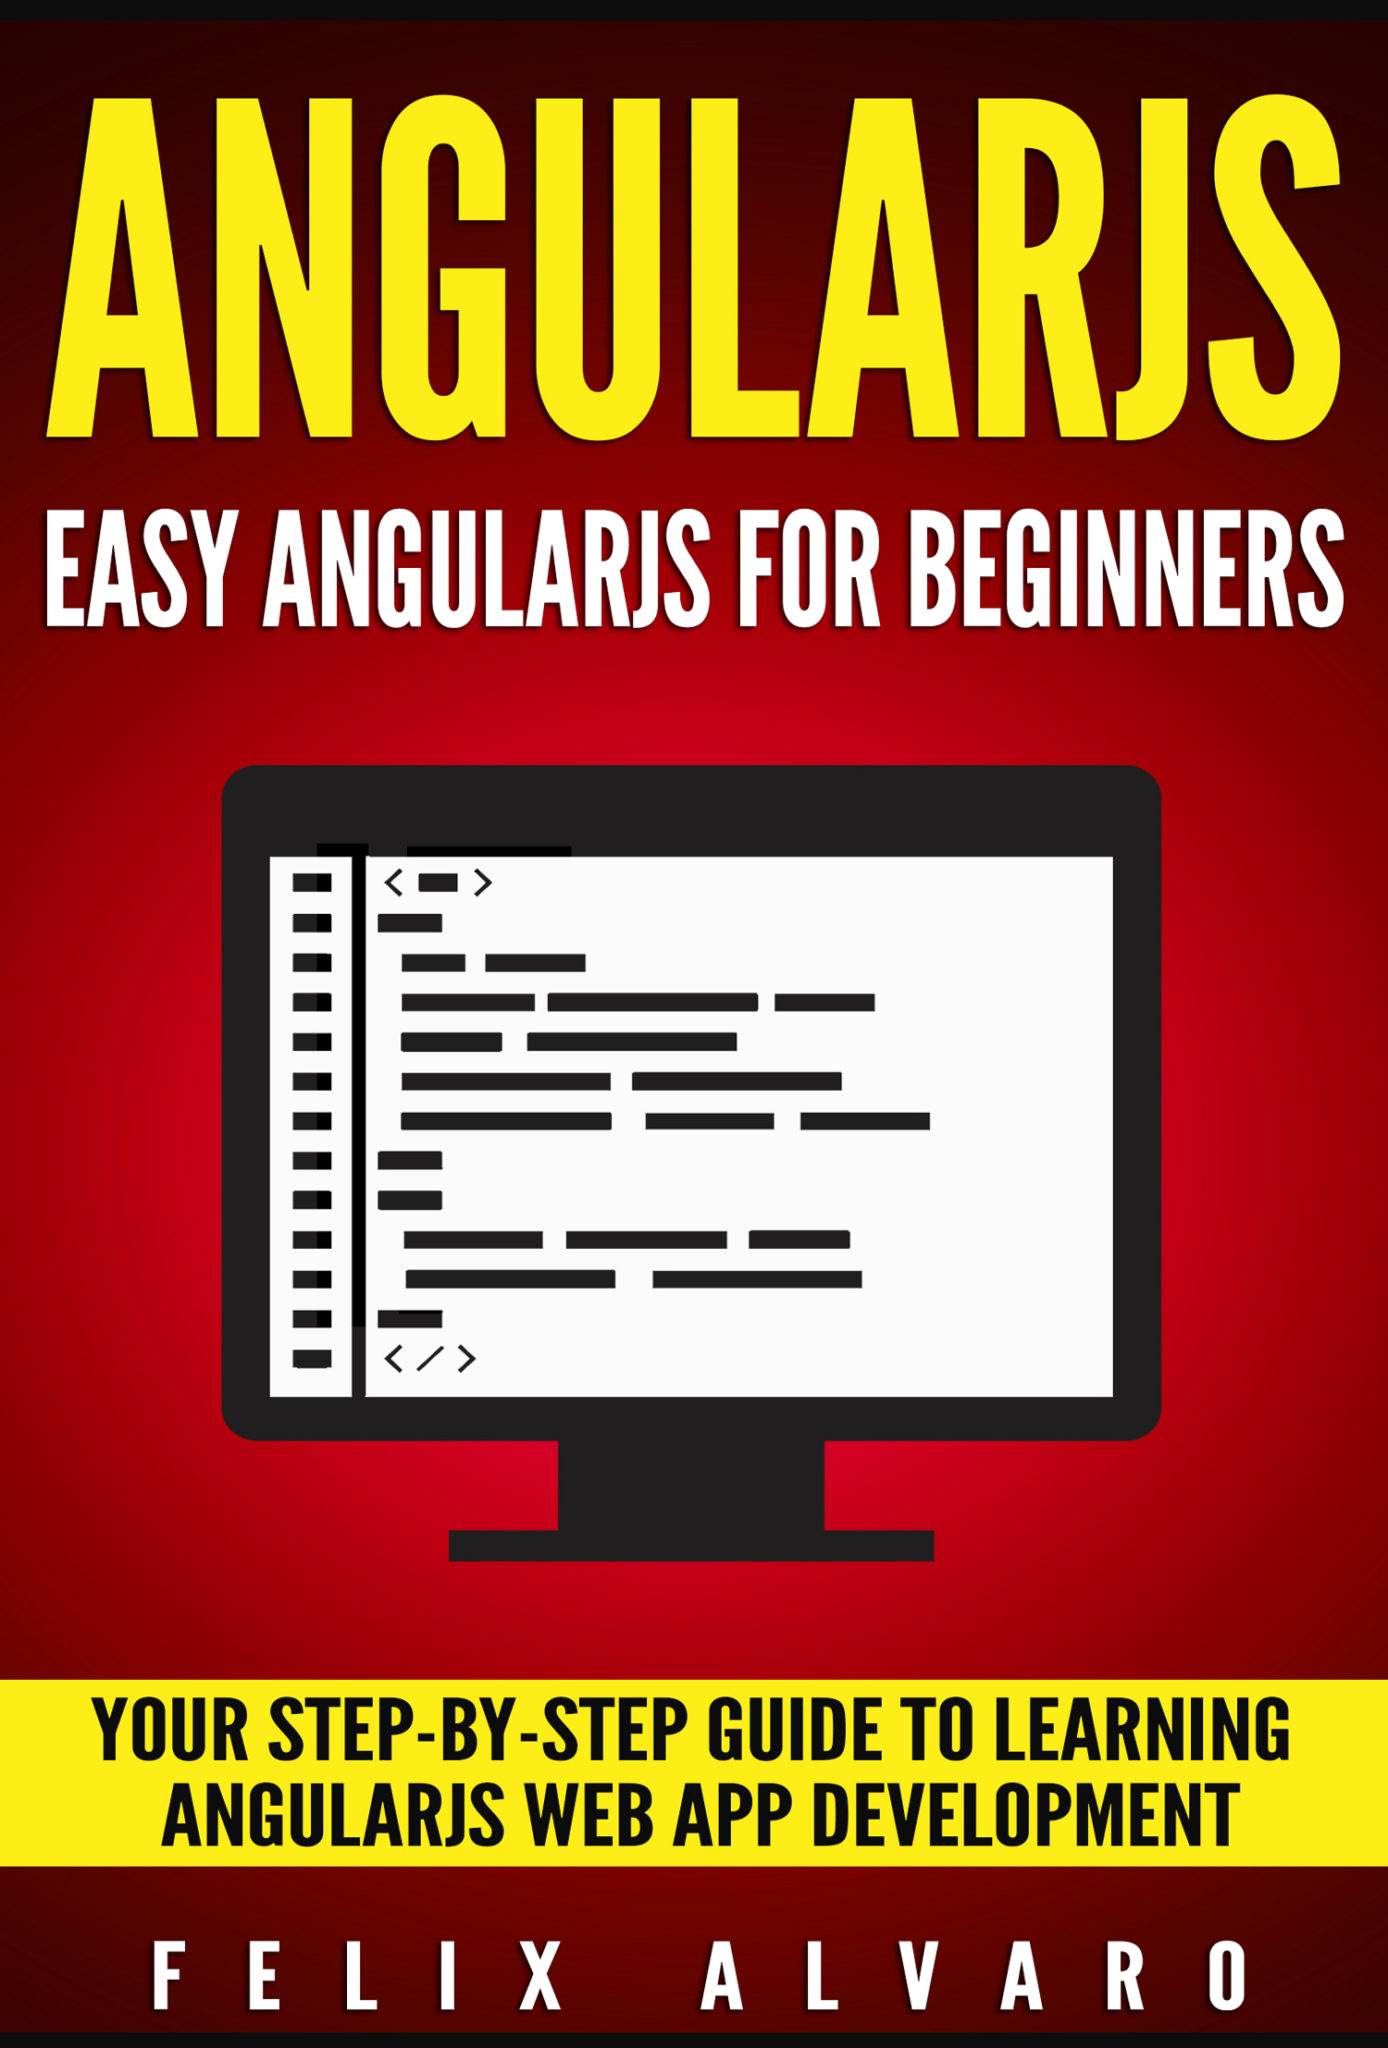 FREE: ANGULARJS: Easy AngularJS For Beginners, Your Step-By-Step Guide to AngularJS Web Application Development by Felix Alvaro